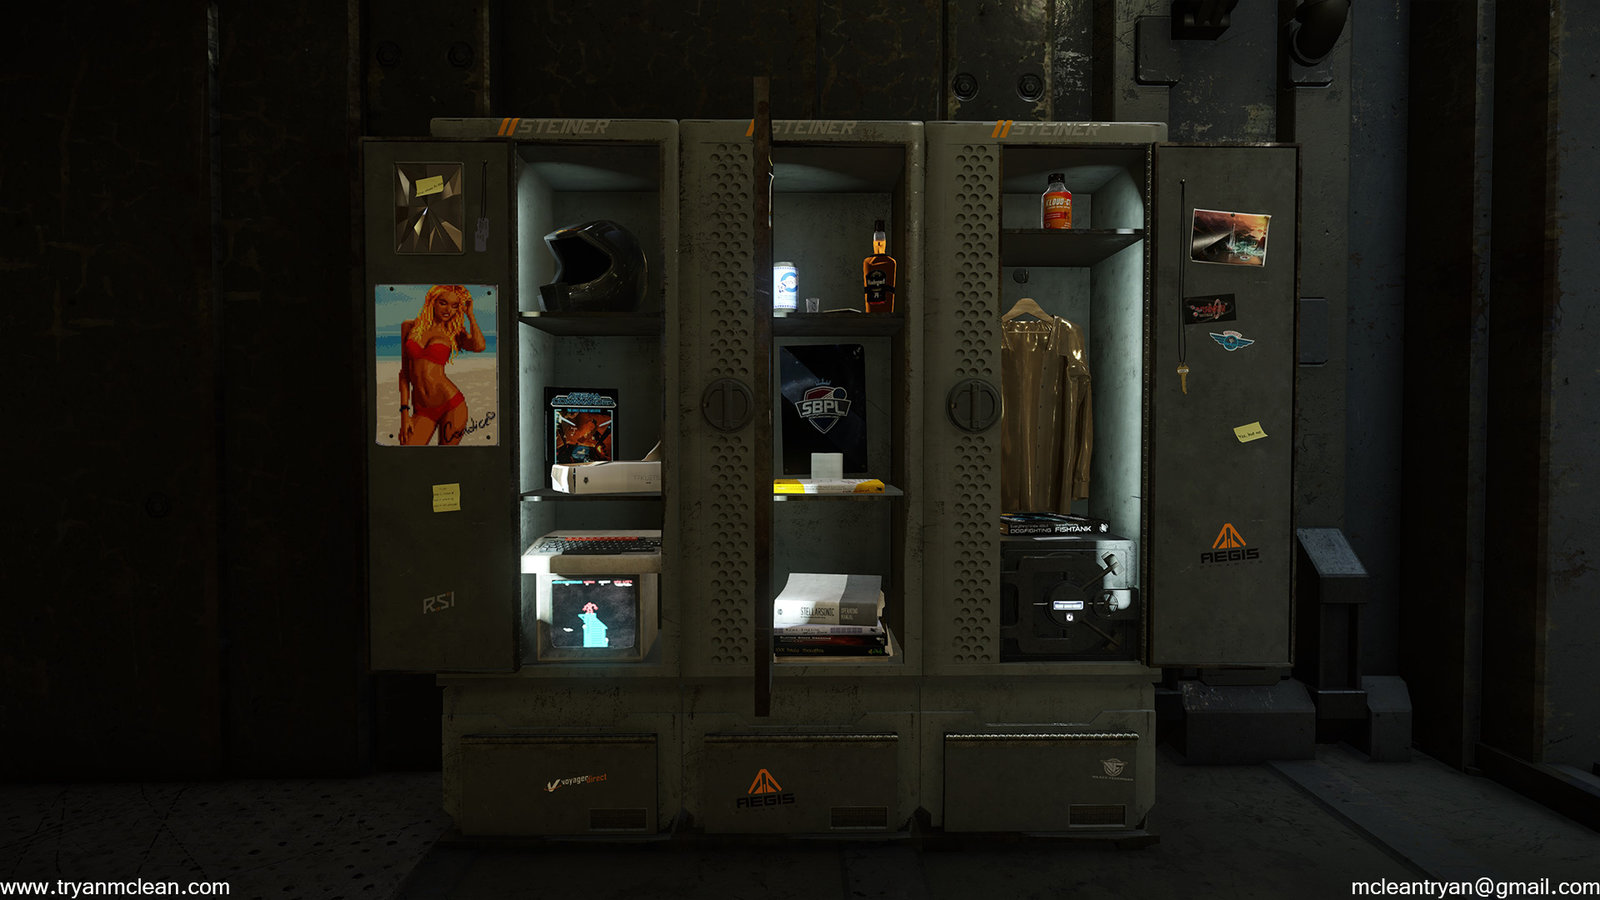 Star Citizen Subscriber Flair Locker. Modelling by myself, except gold shirt and safe. Textures and blending done by others on team. 